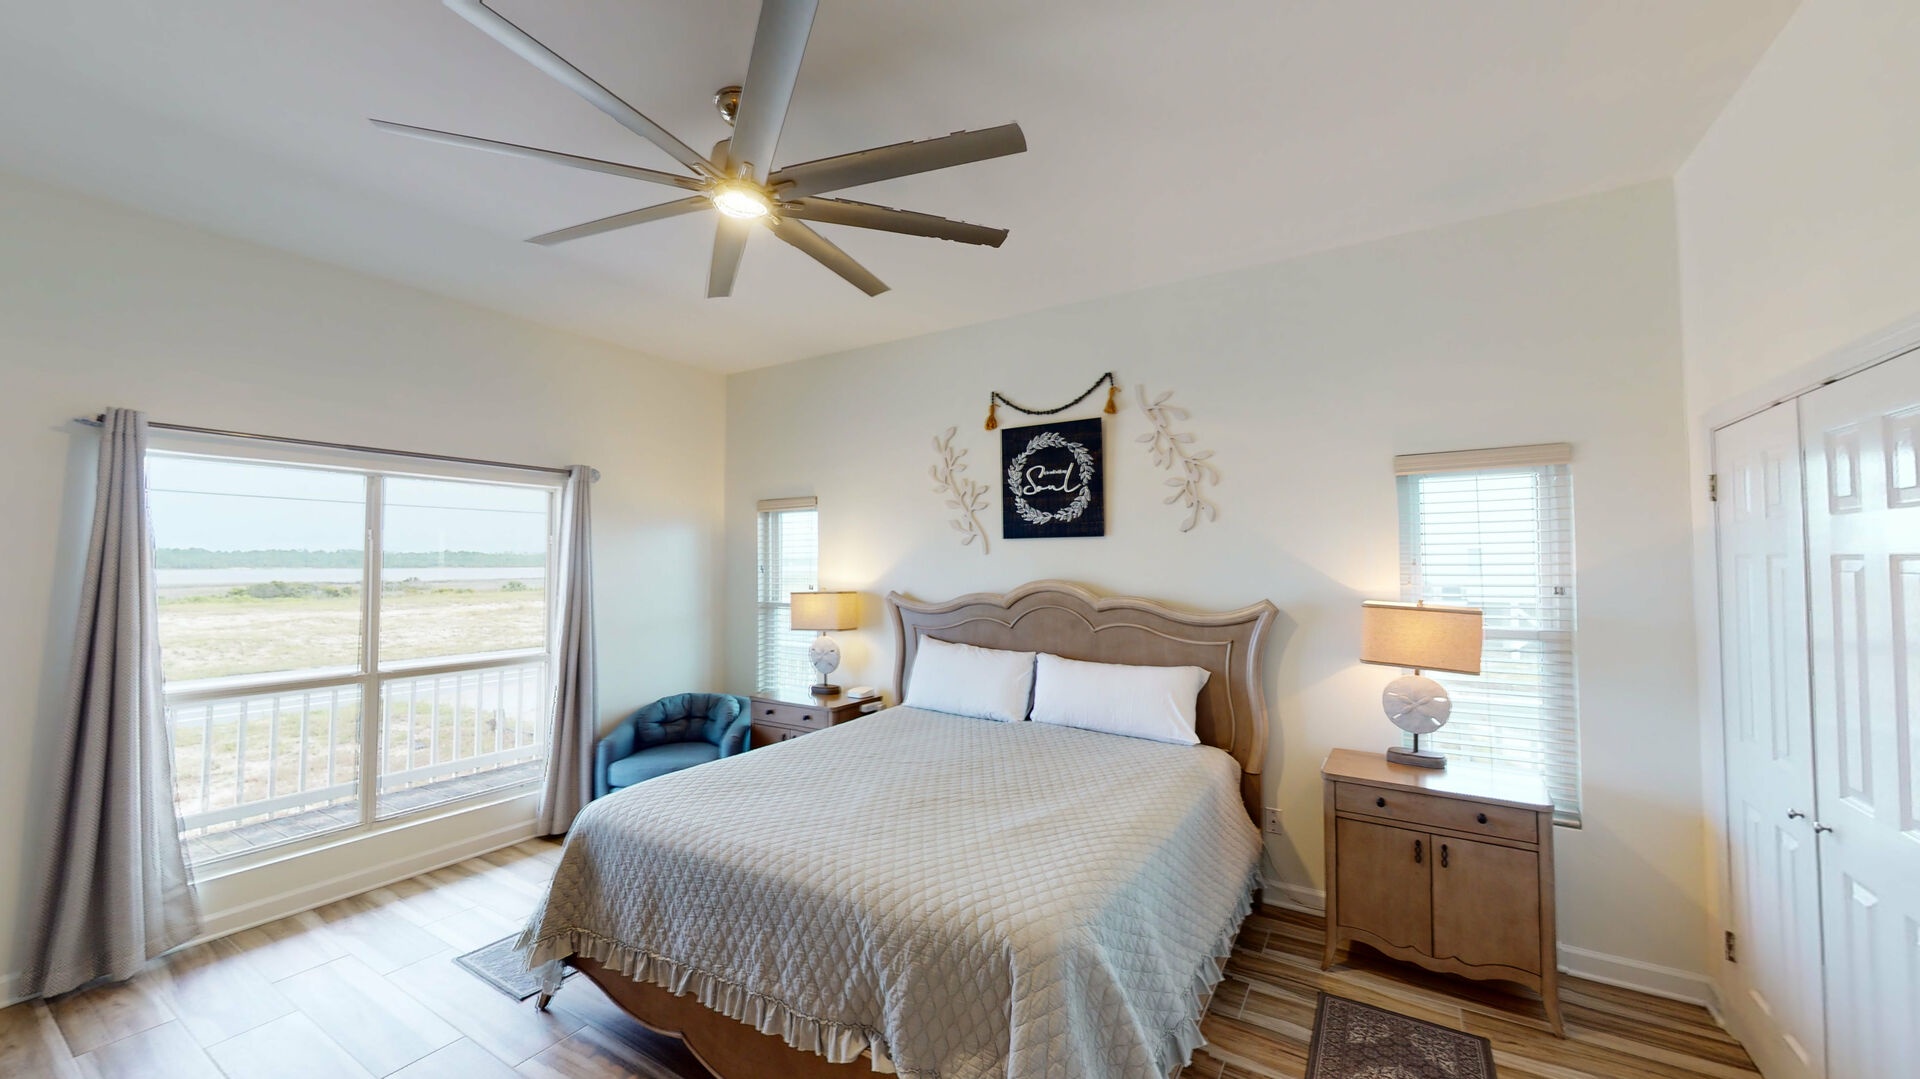 Bedroom #2 has a king bed, ceiling fan and lagoon views